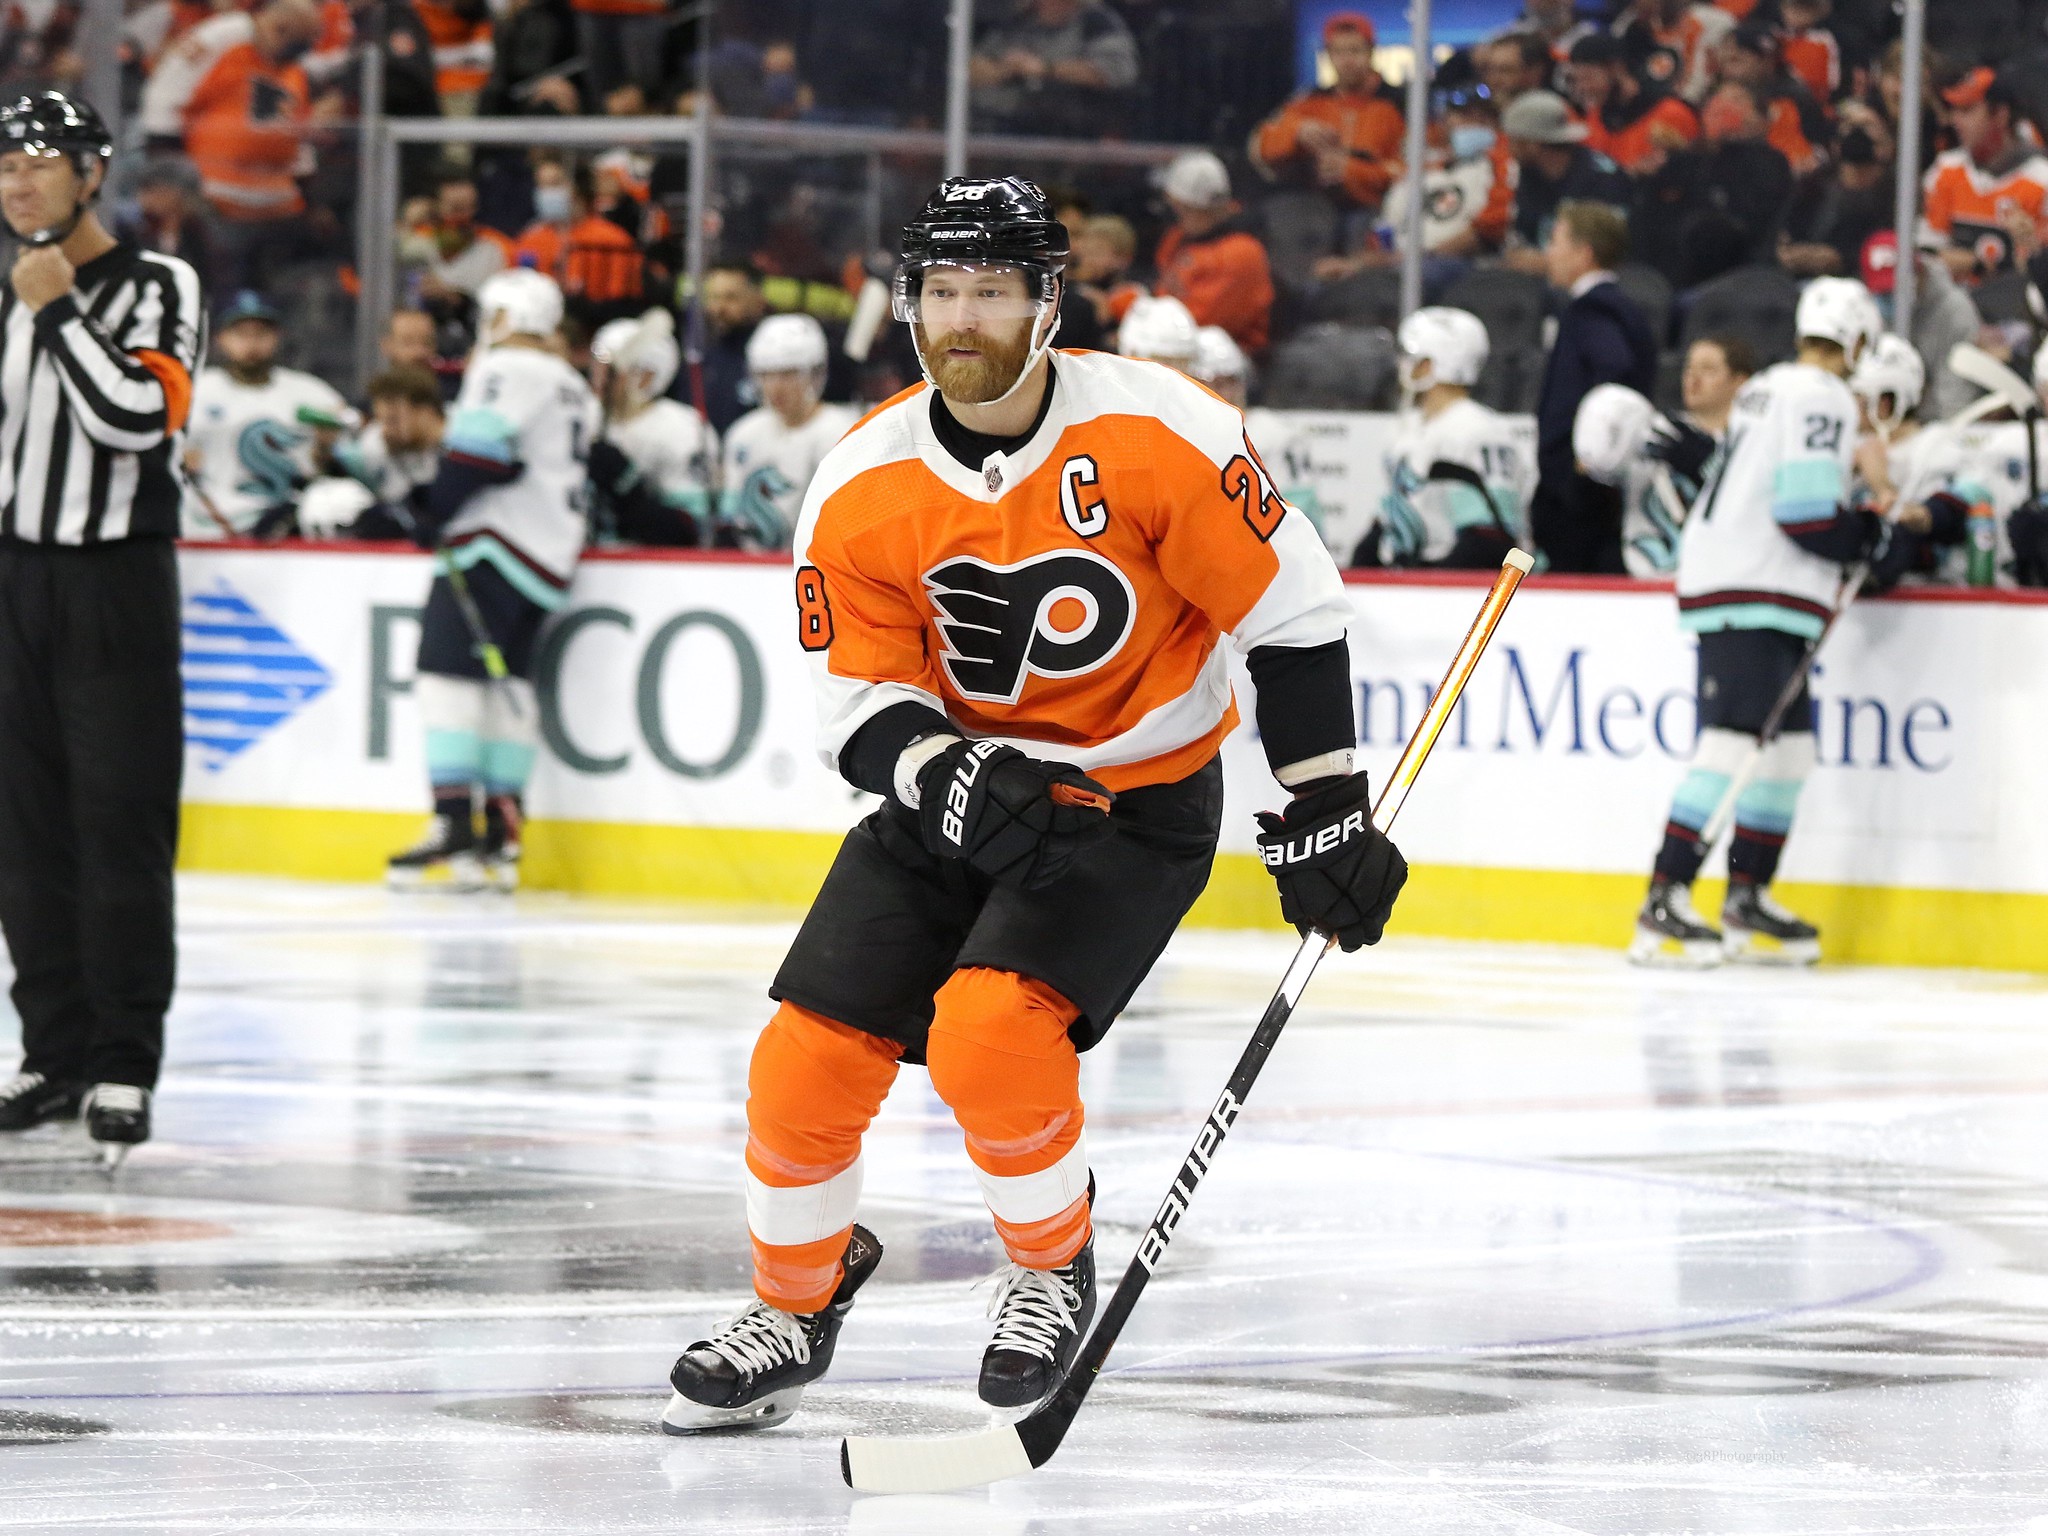 Current and former teammates of Claude Giroux reflect on his career